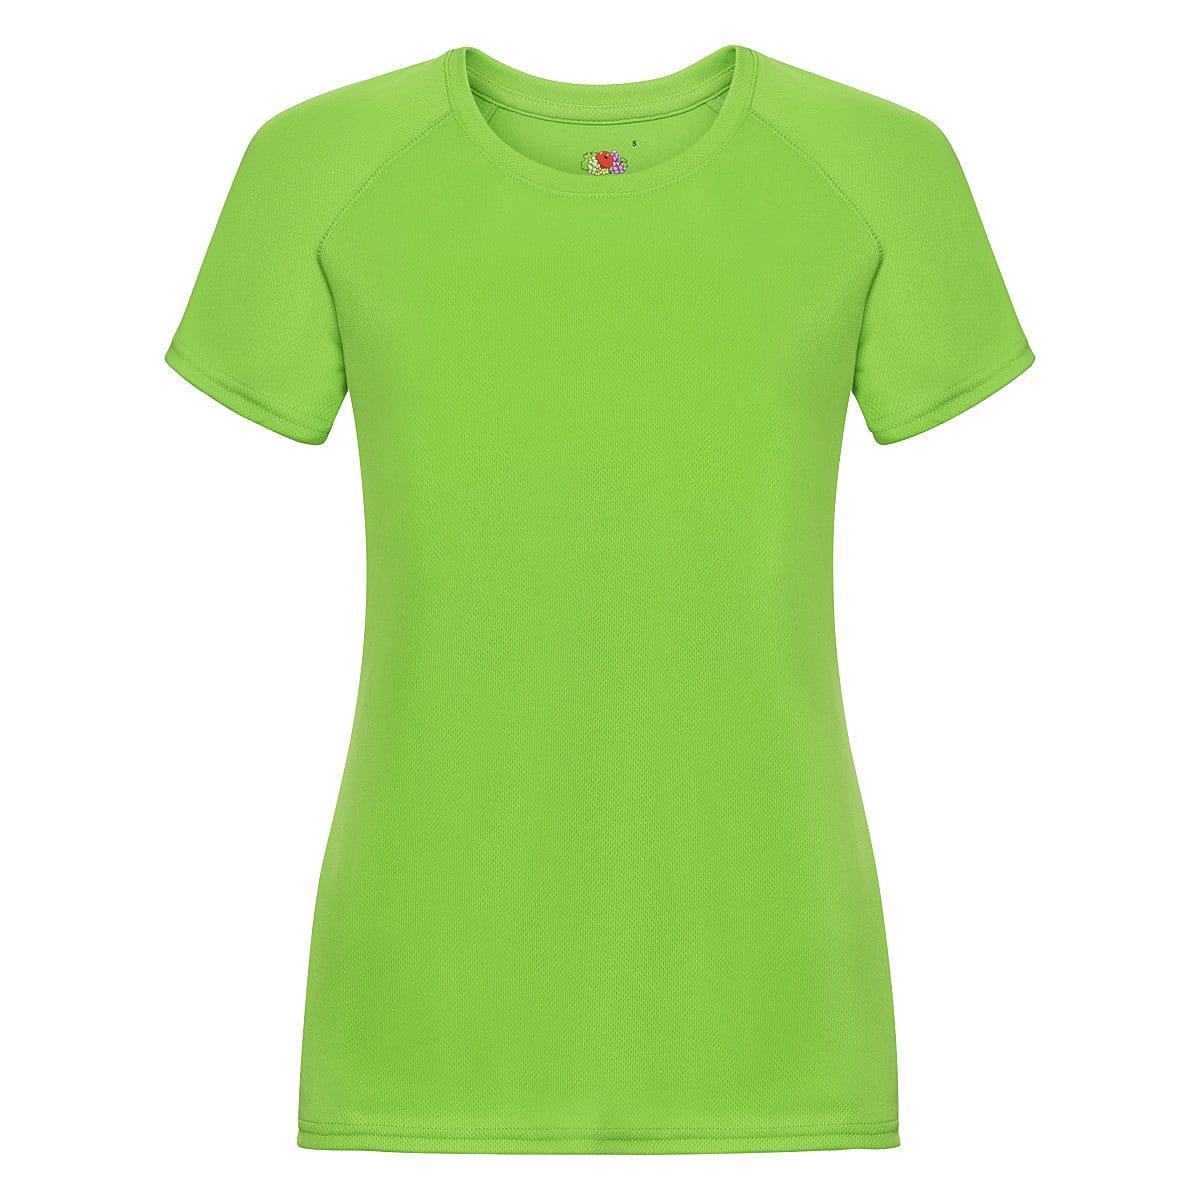 Fruit Of The Loom Womens Performance T-Shirt in Lime (Product Code: 61392)